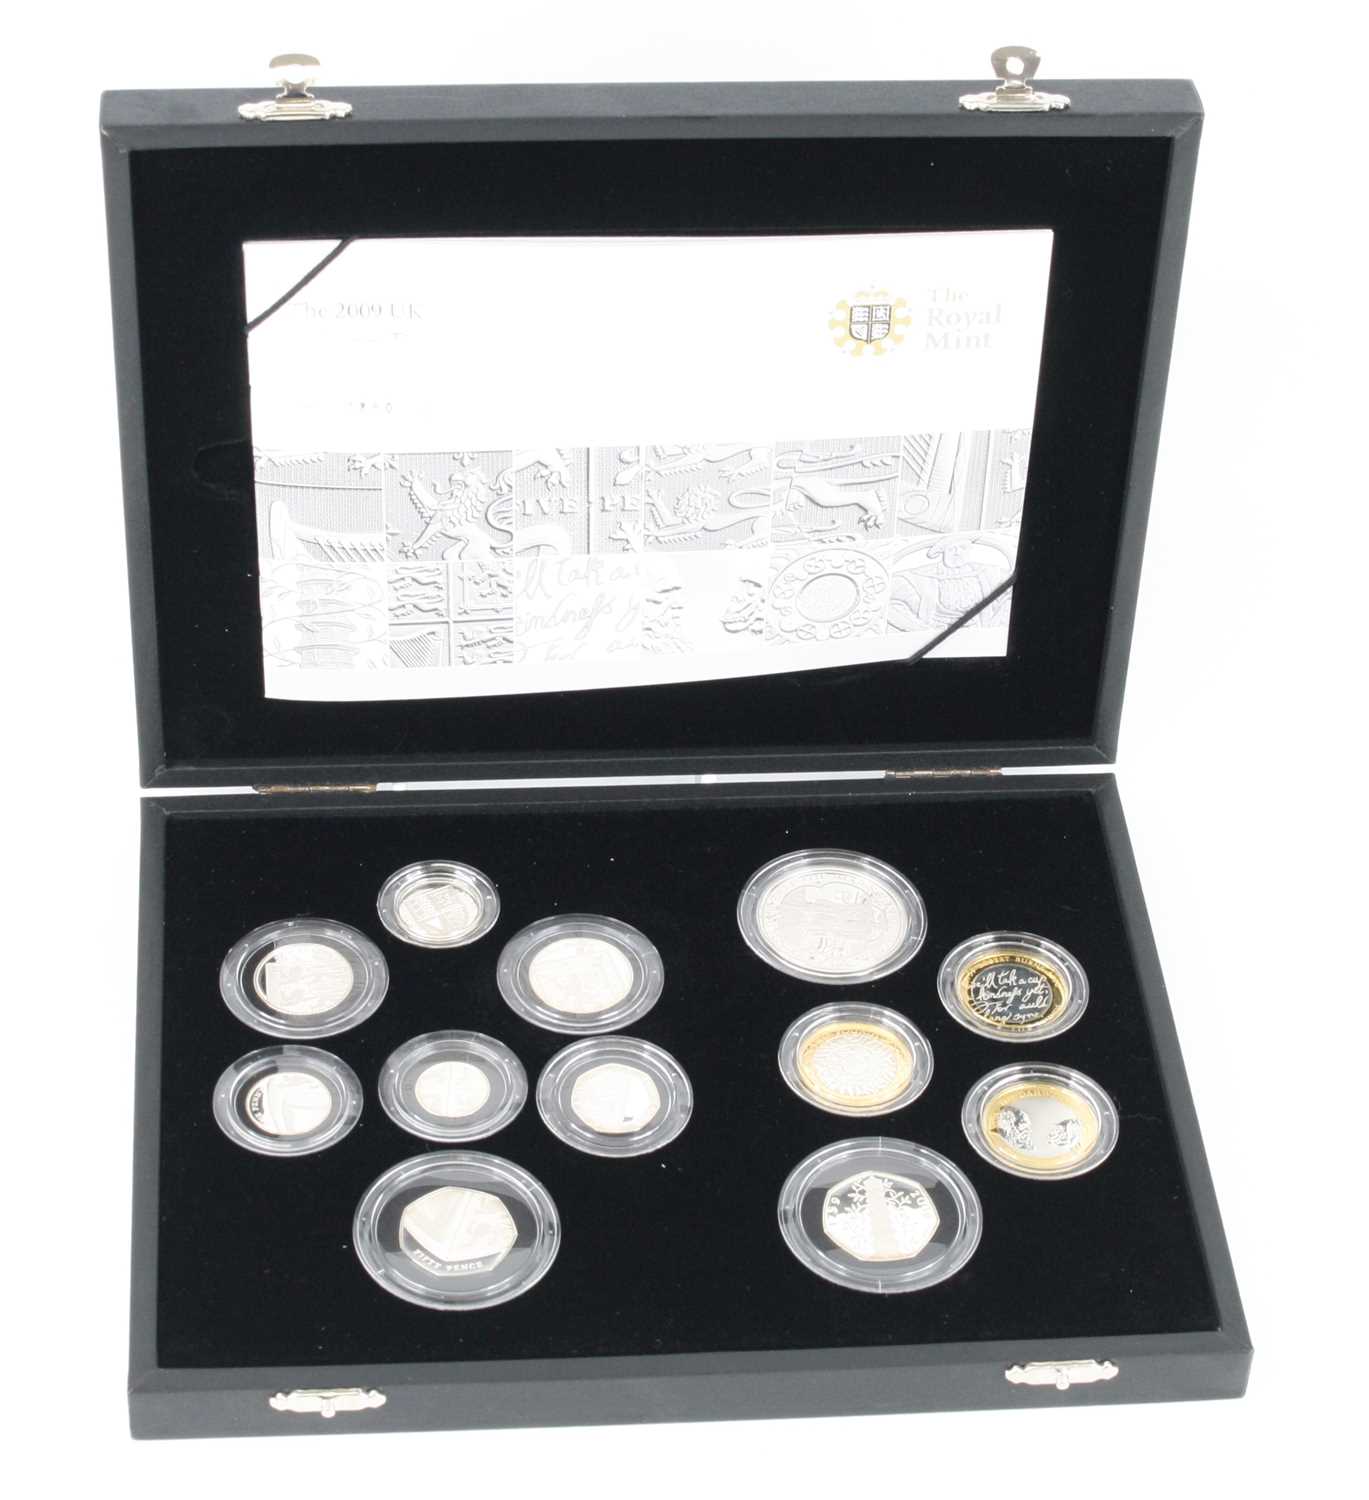 United Kingdom, The Royal Mint, The 2009 Silver Proof Coin Set, a collection of thirteen coins to